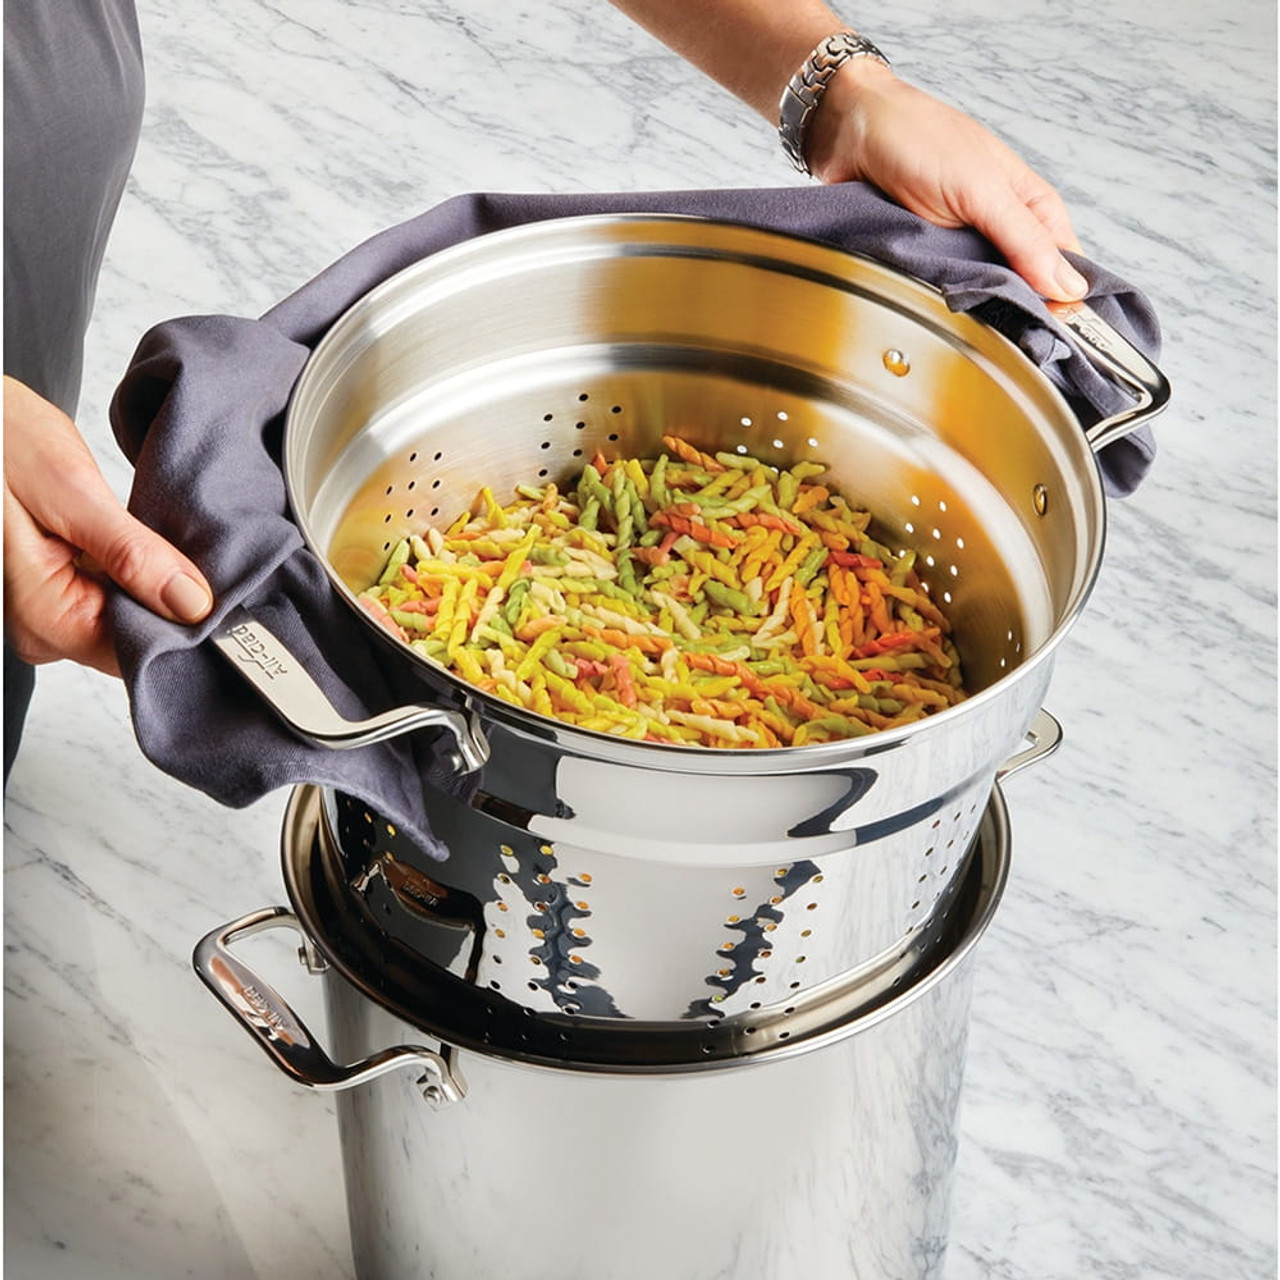 All-Clad Stainless Steel Multi-Pot